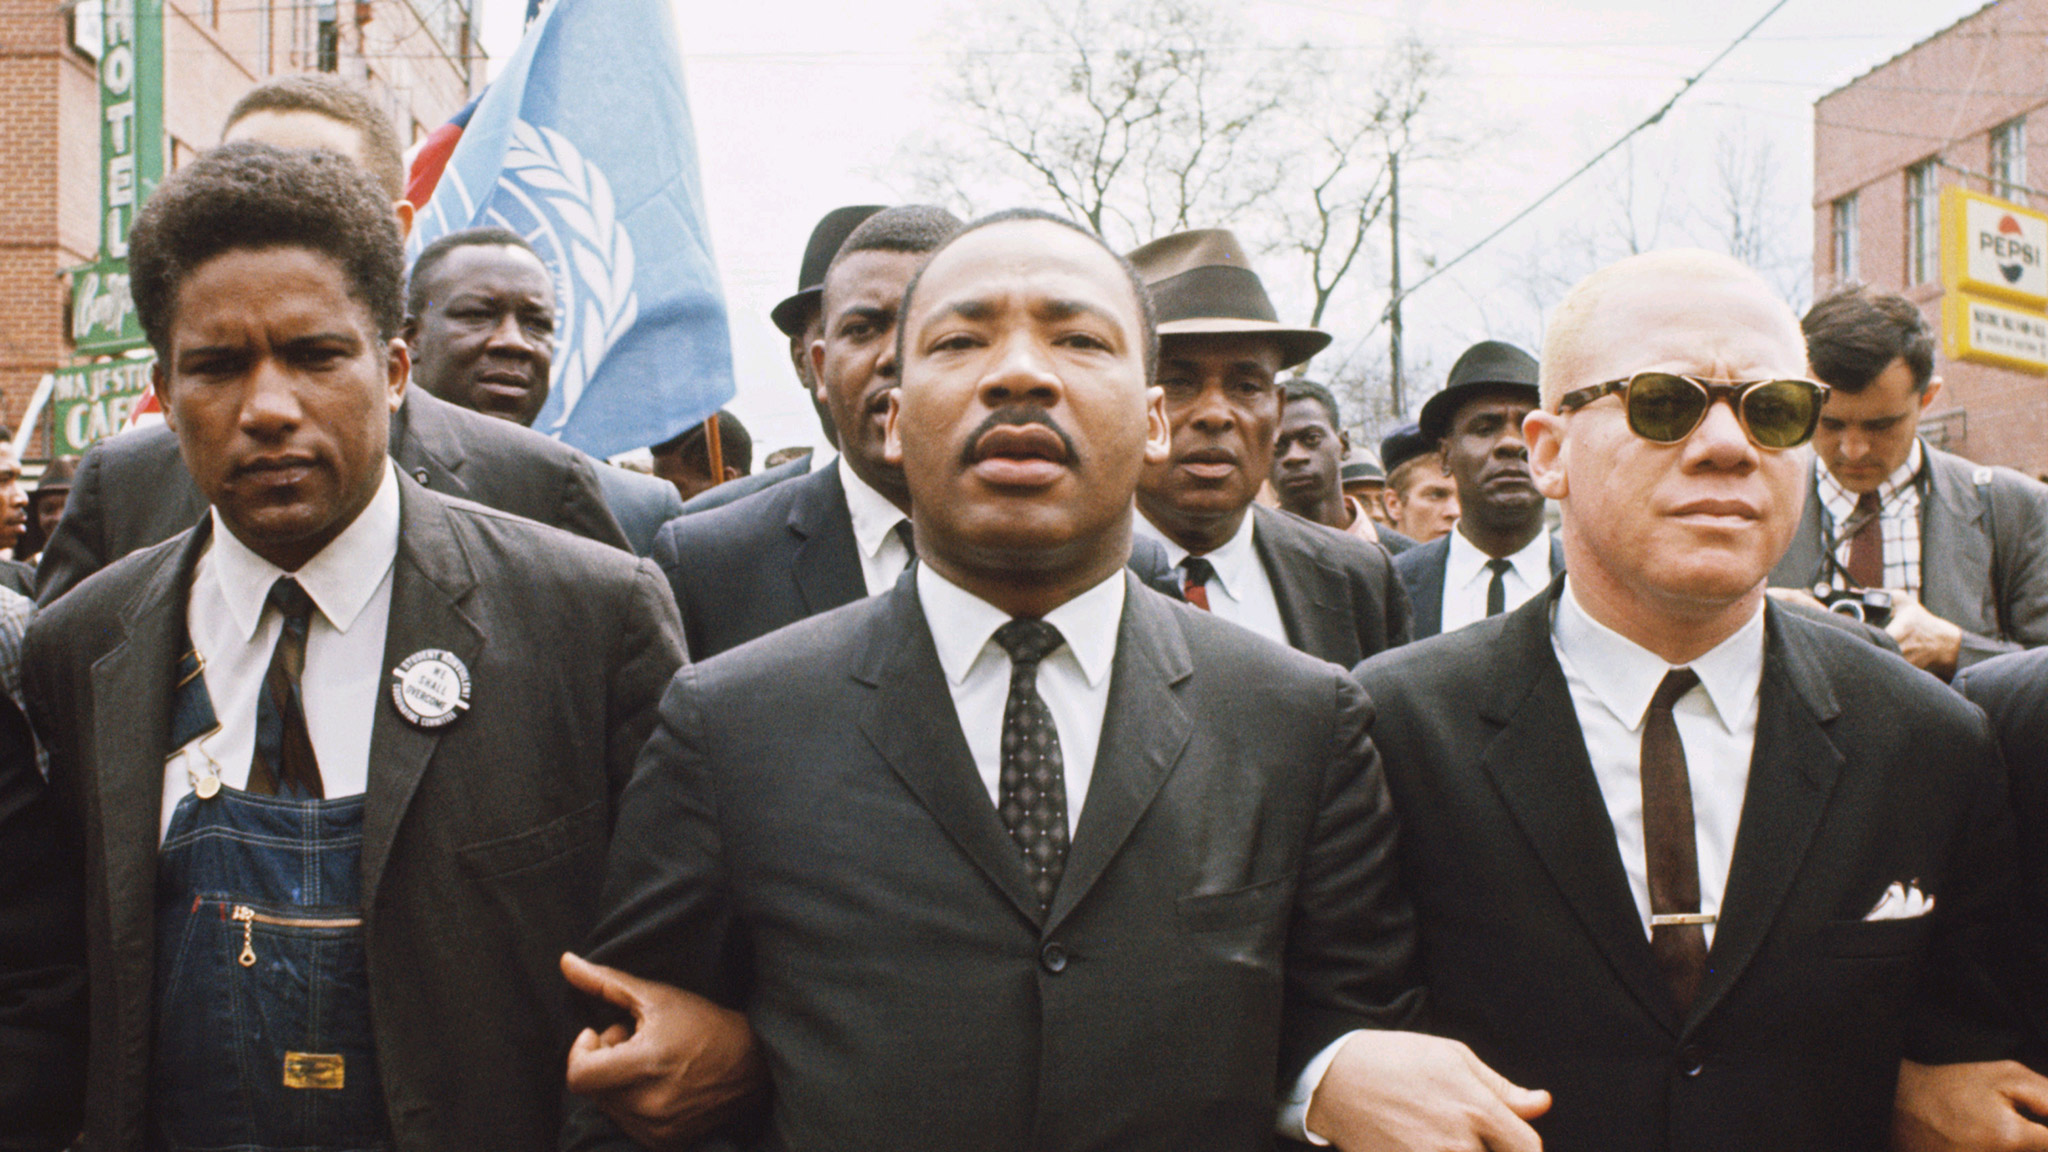 martin luther king biography channel